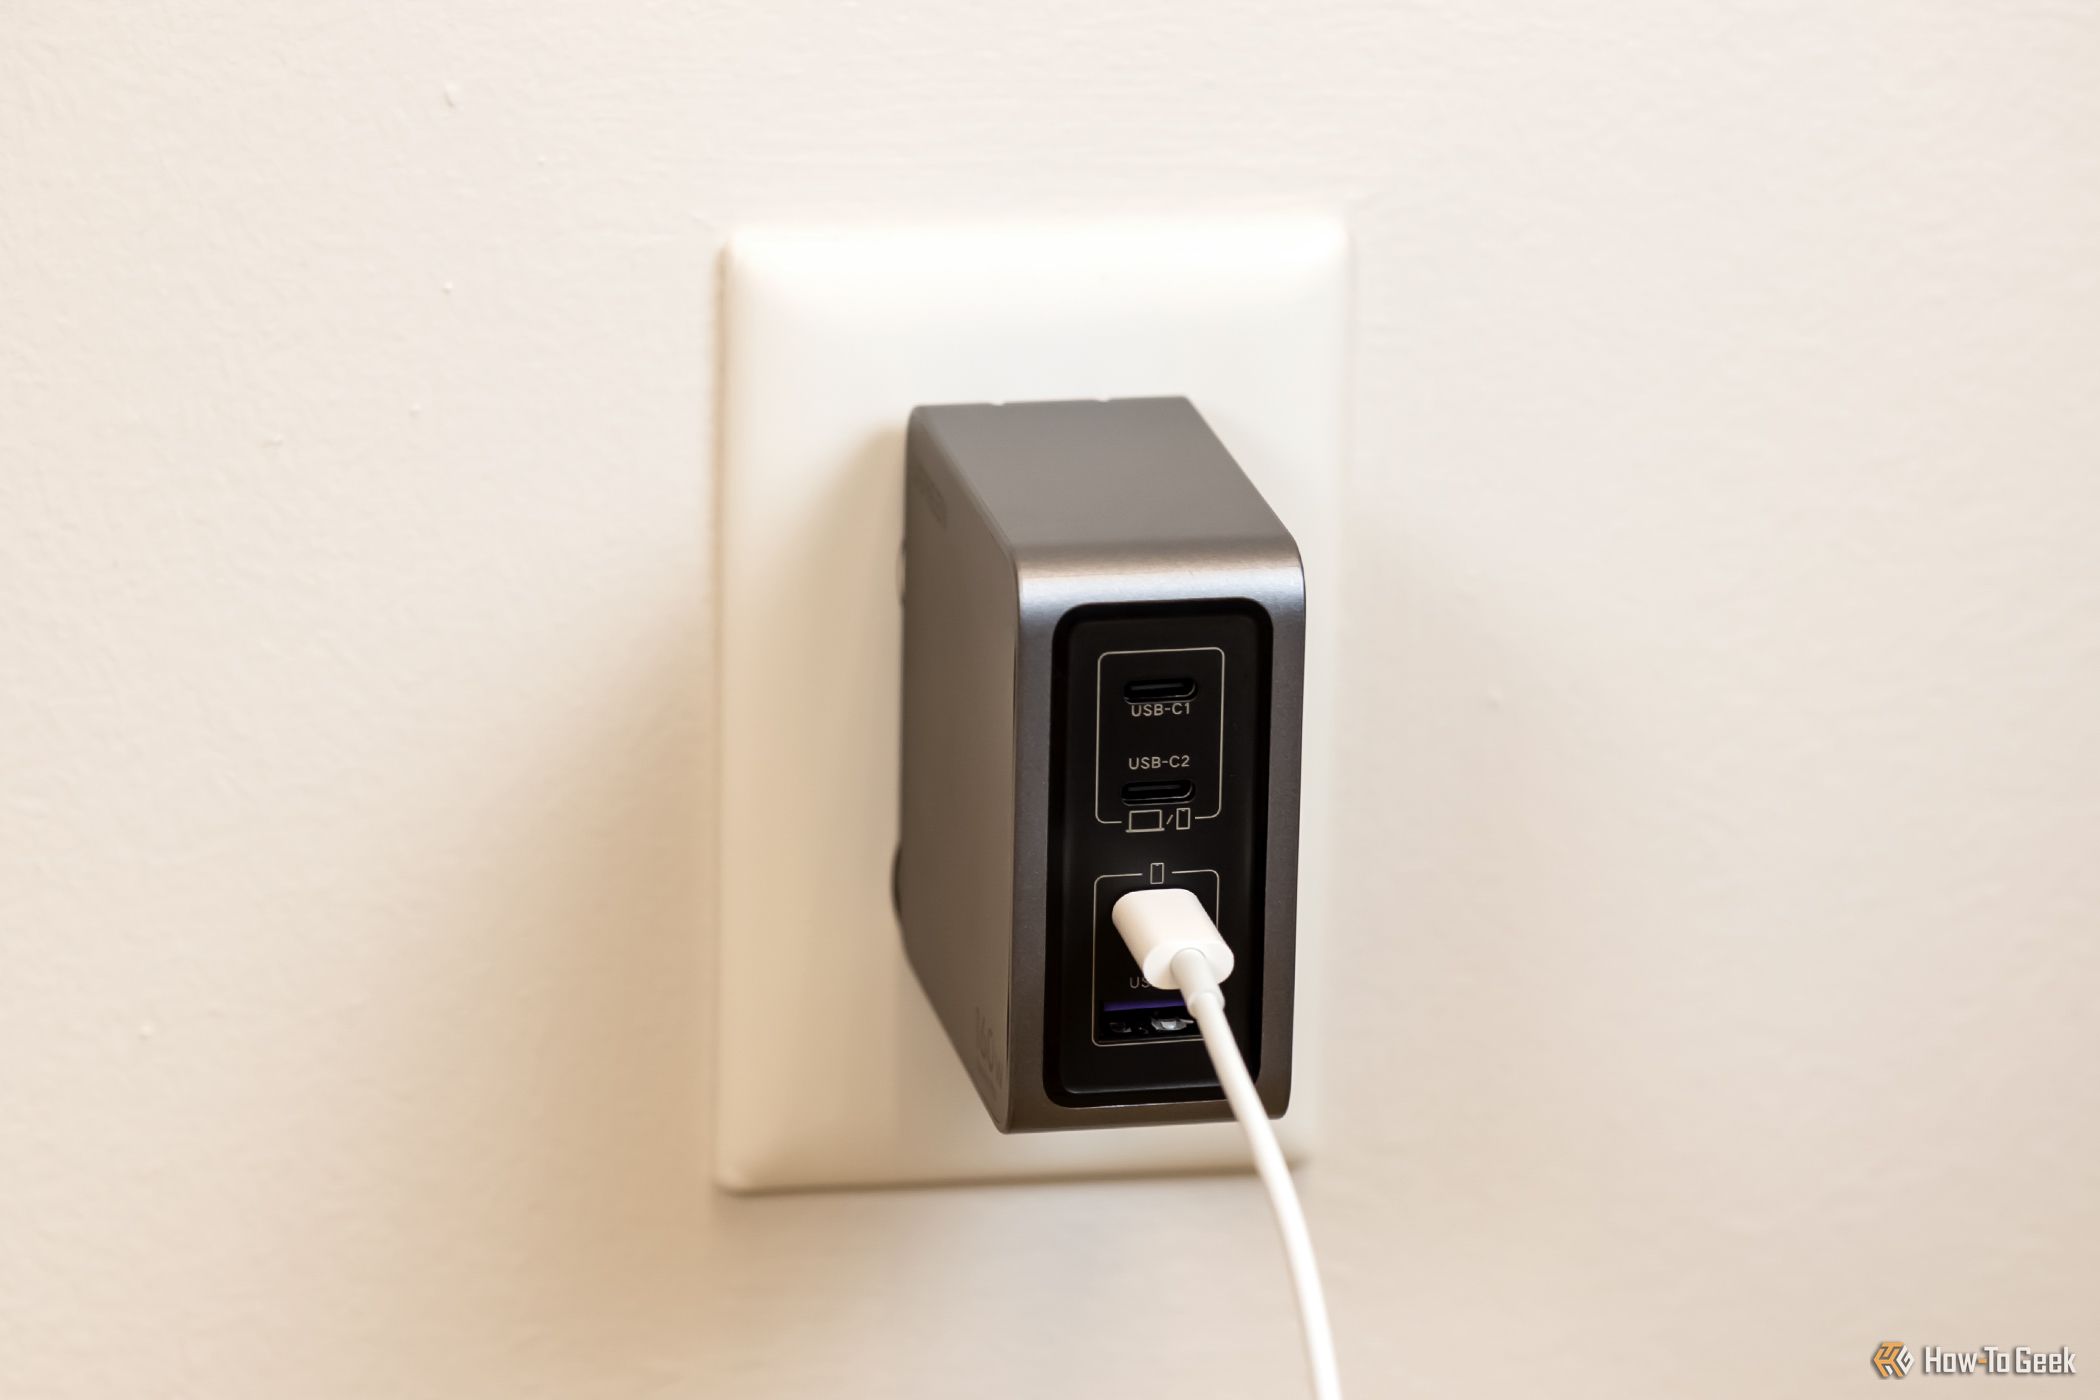 The Ugreen Nexode Pro 160 USB-C Wall Charger plugged into an outlet